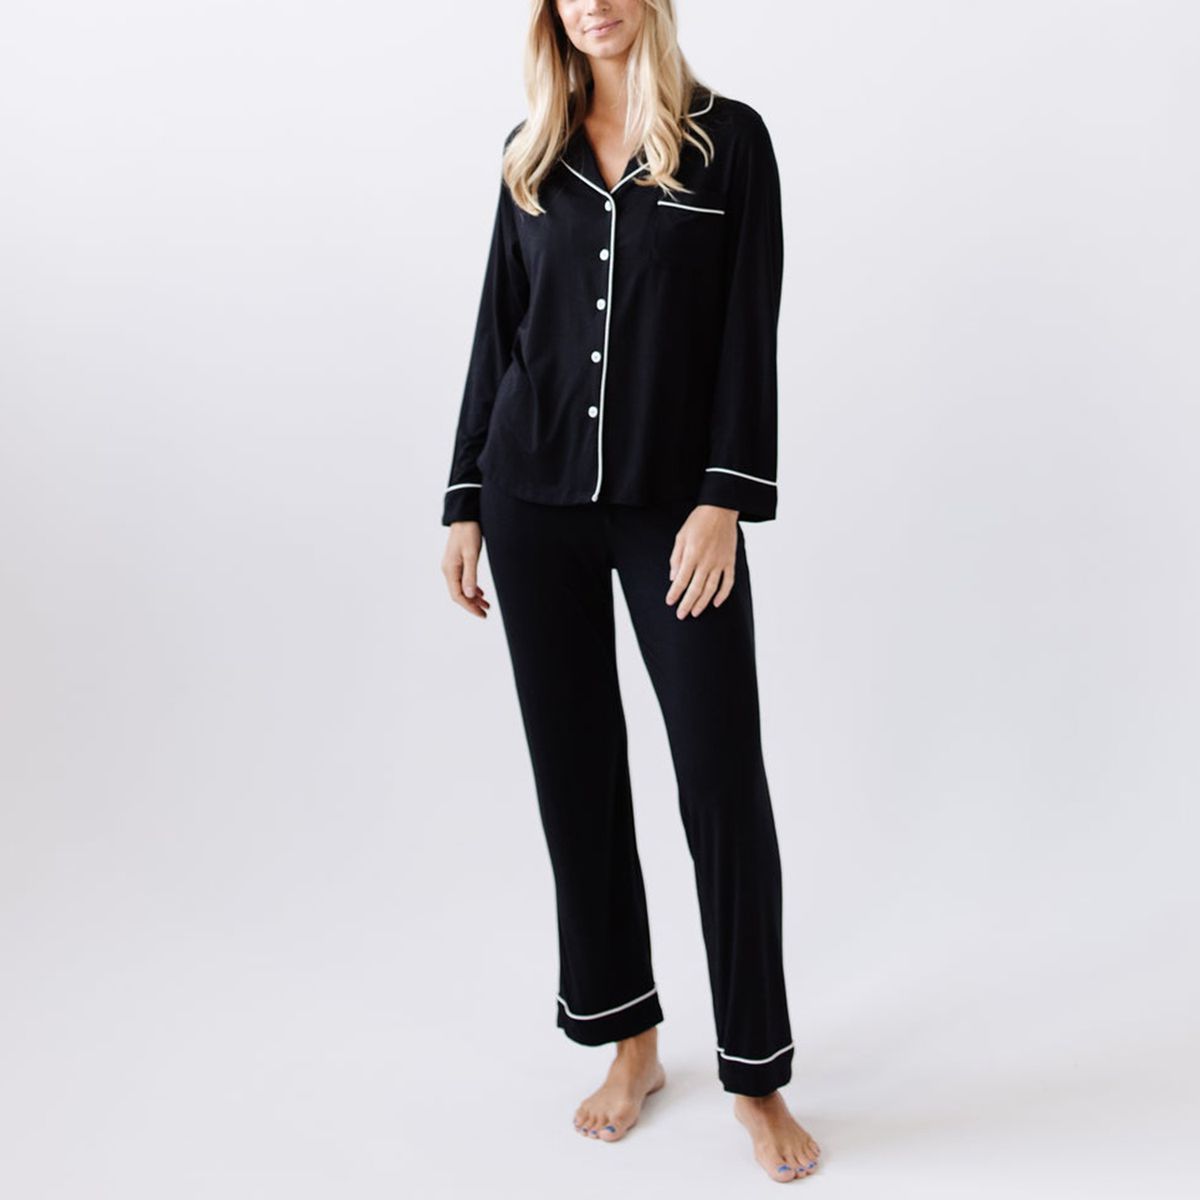 Cozy Earth Women's Long Sleeve Stretch-Knit Bamboo Pajama Set in Black